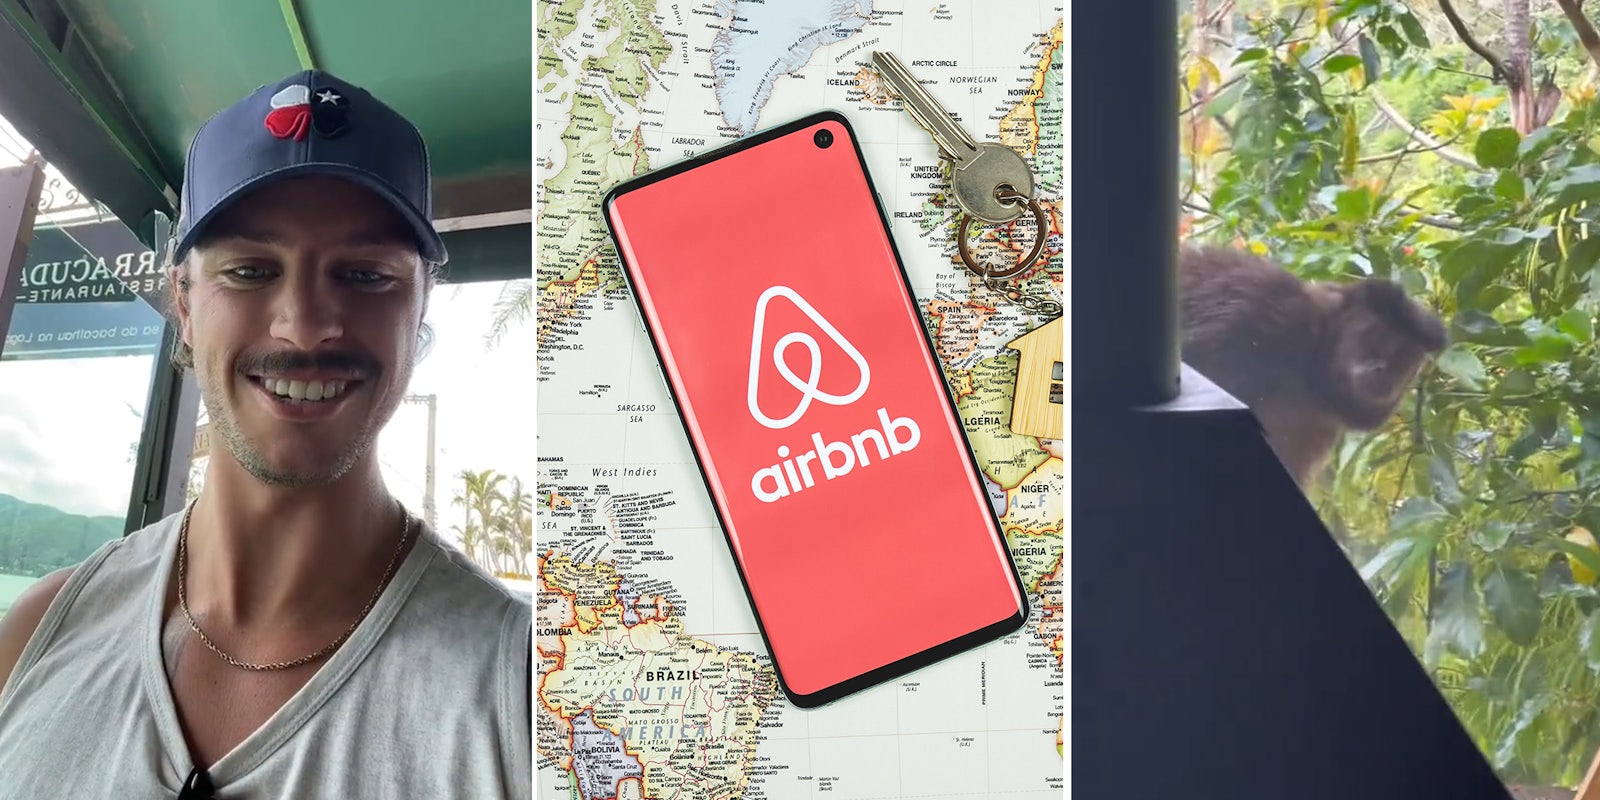 Airbnb guest says monkeys broke into his rental because he left bananas out